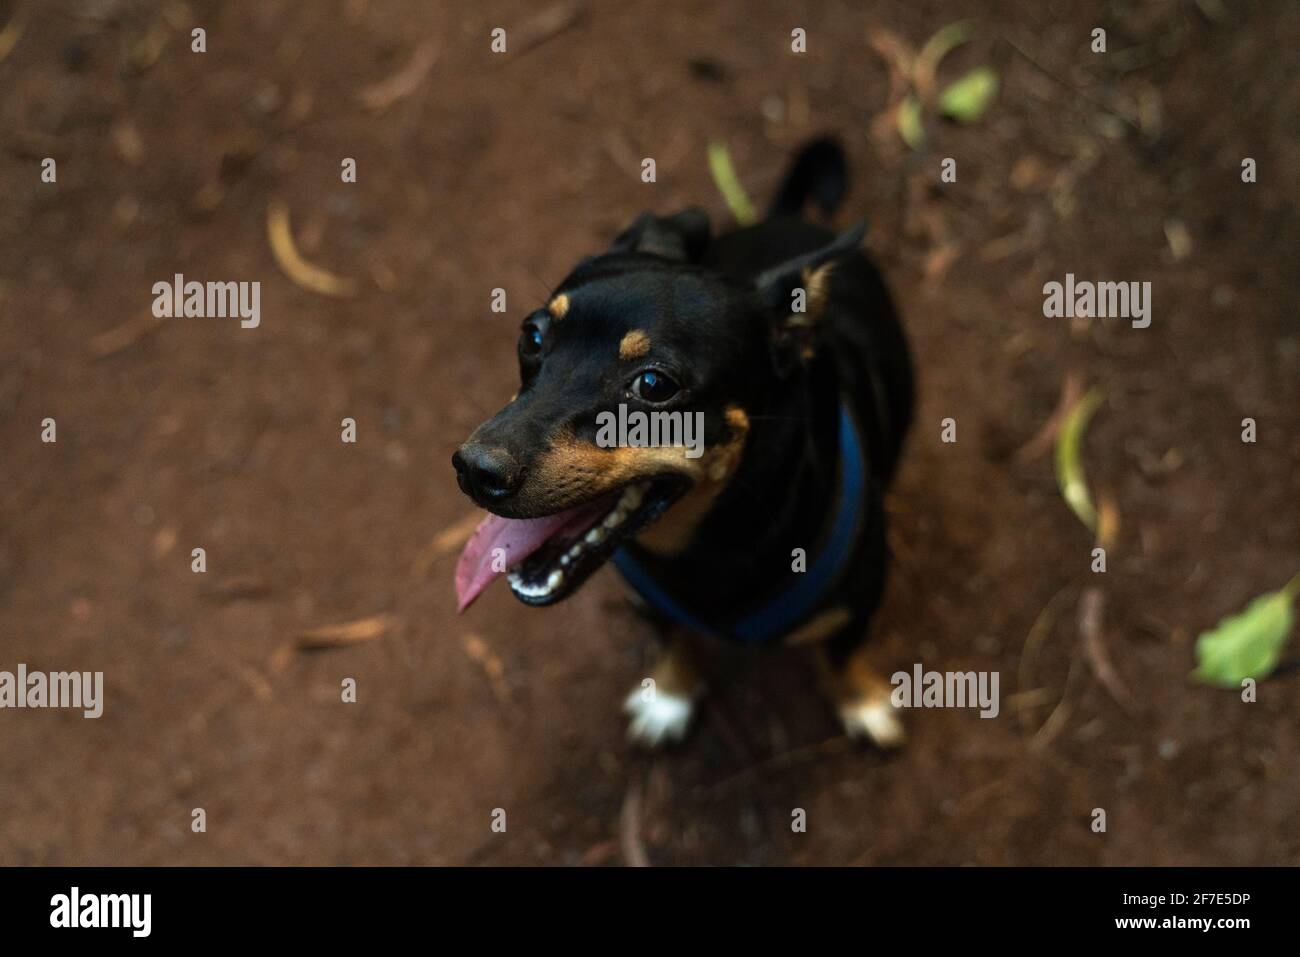 images Alamy hi-res - and Enthused stock photography